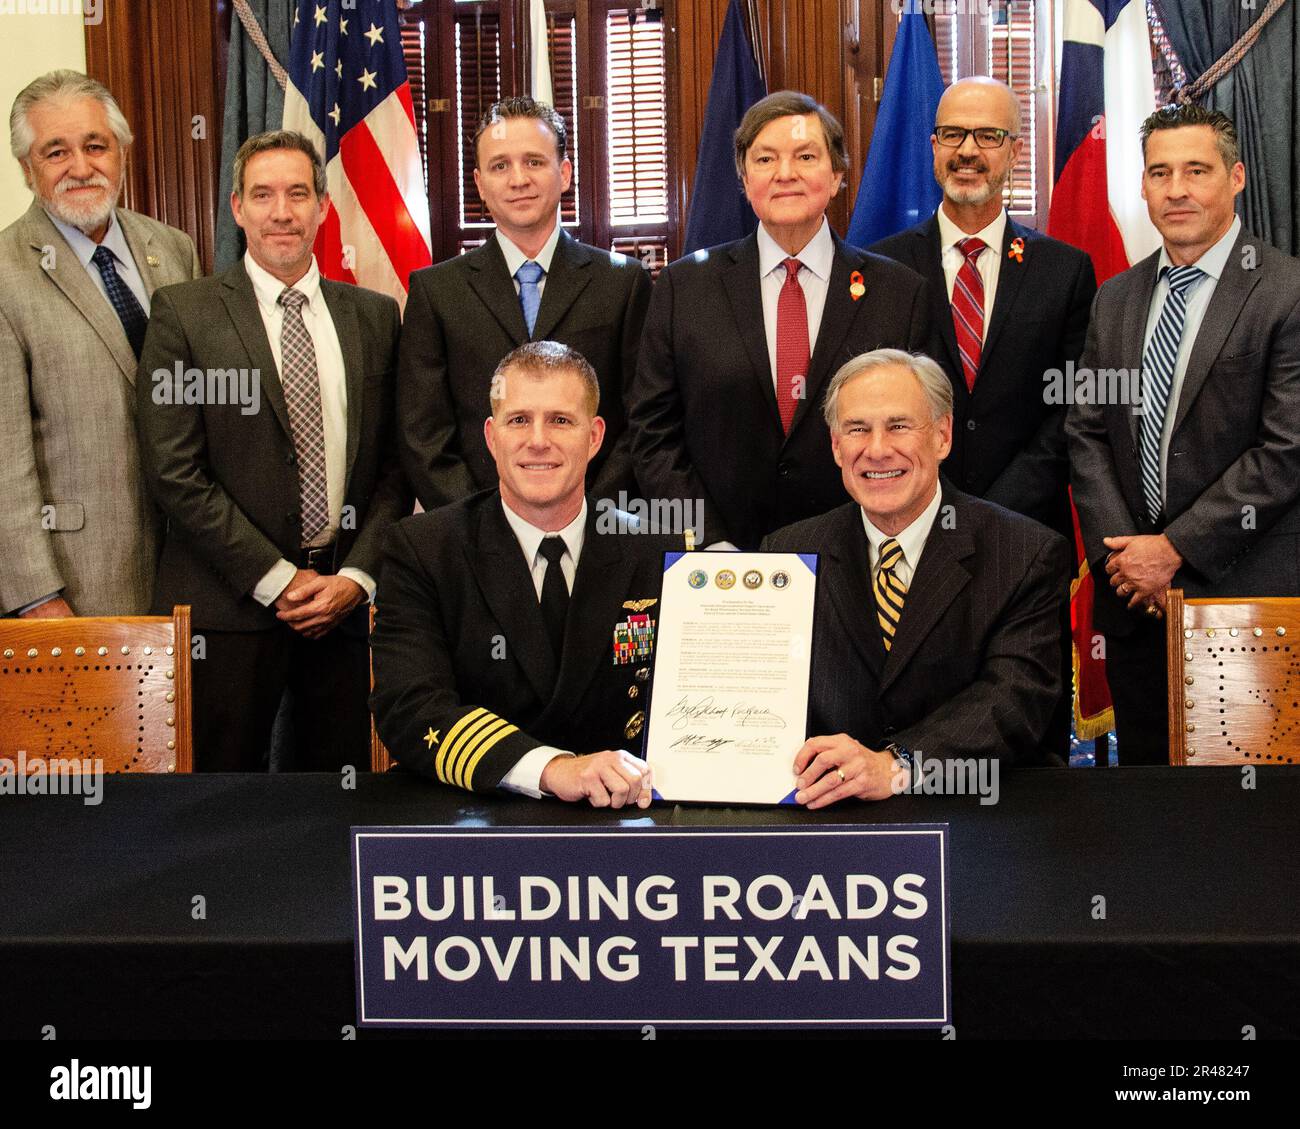 Captain Greg Smith, Navy Region Southeast Chief of Staff, sits with Texas Governor Greg Abbot following the signing of an historic proclamation for the largest Department of Defense Inter Governmental Service Agreement.  The proclamation recognizes the first IGSA with a single partner that will benefit three military branches.  Representatives from the Texas Department of Transportation, U.S. Army, and U.S. Air Force were also on hand for the signing ceremony. Stock Photo